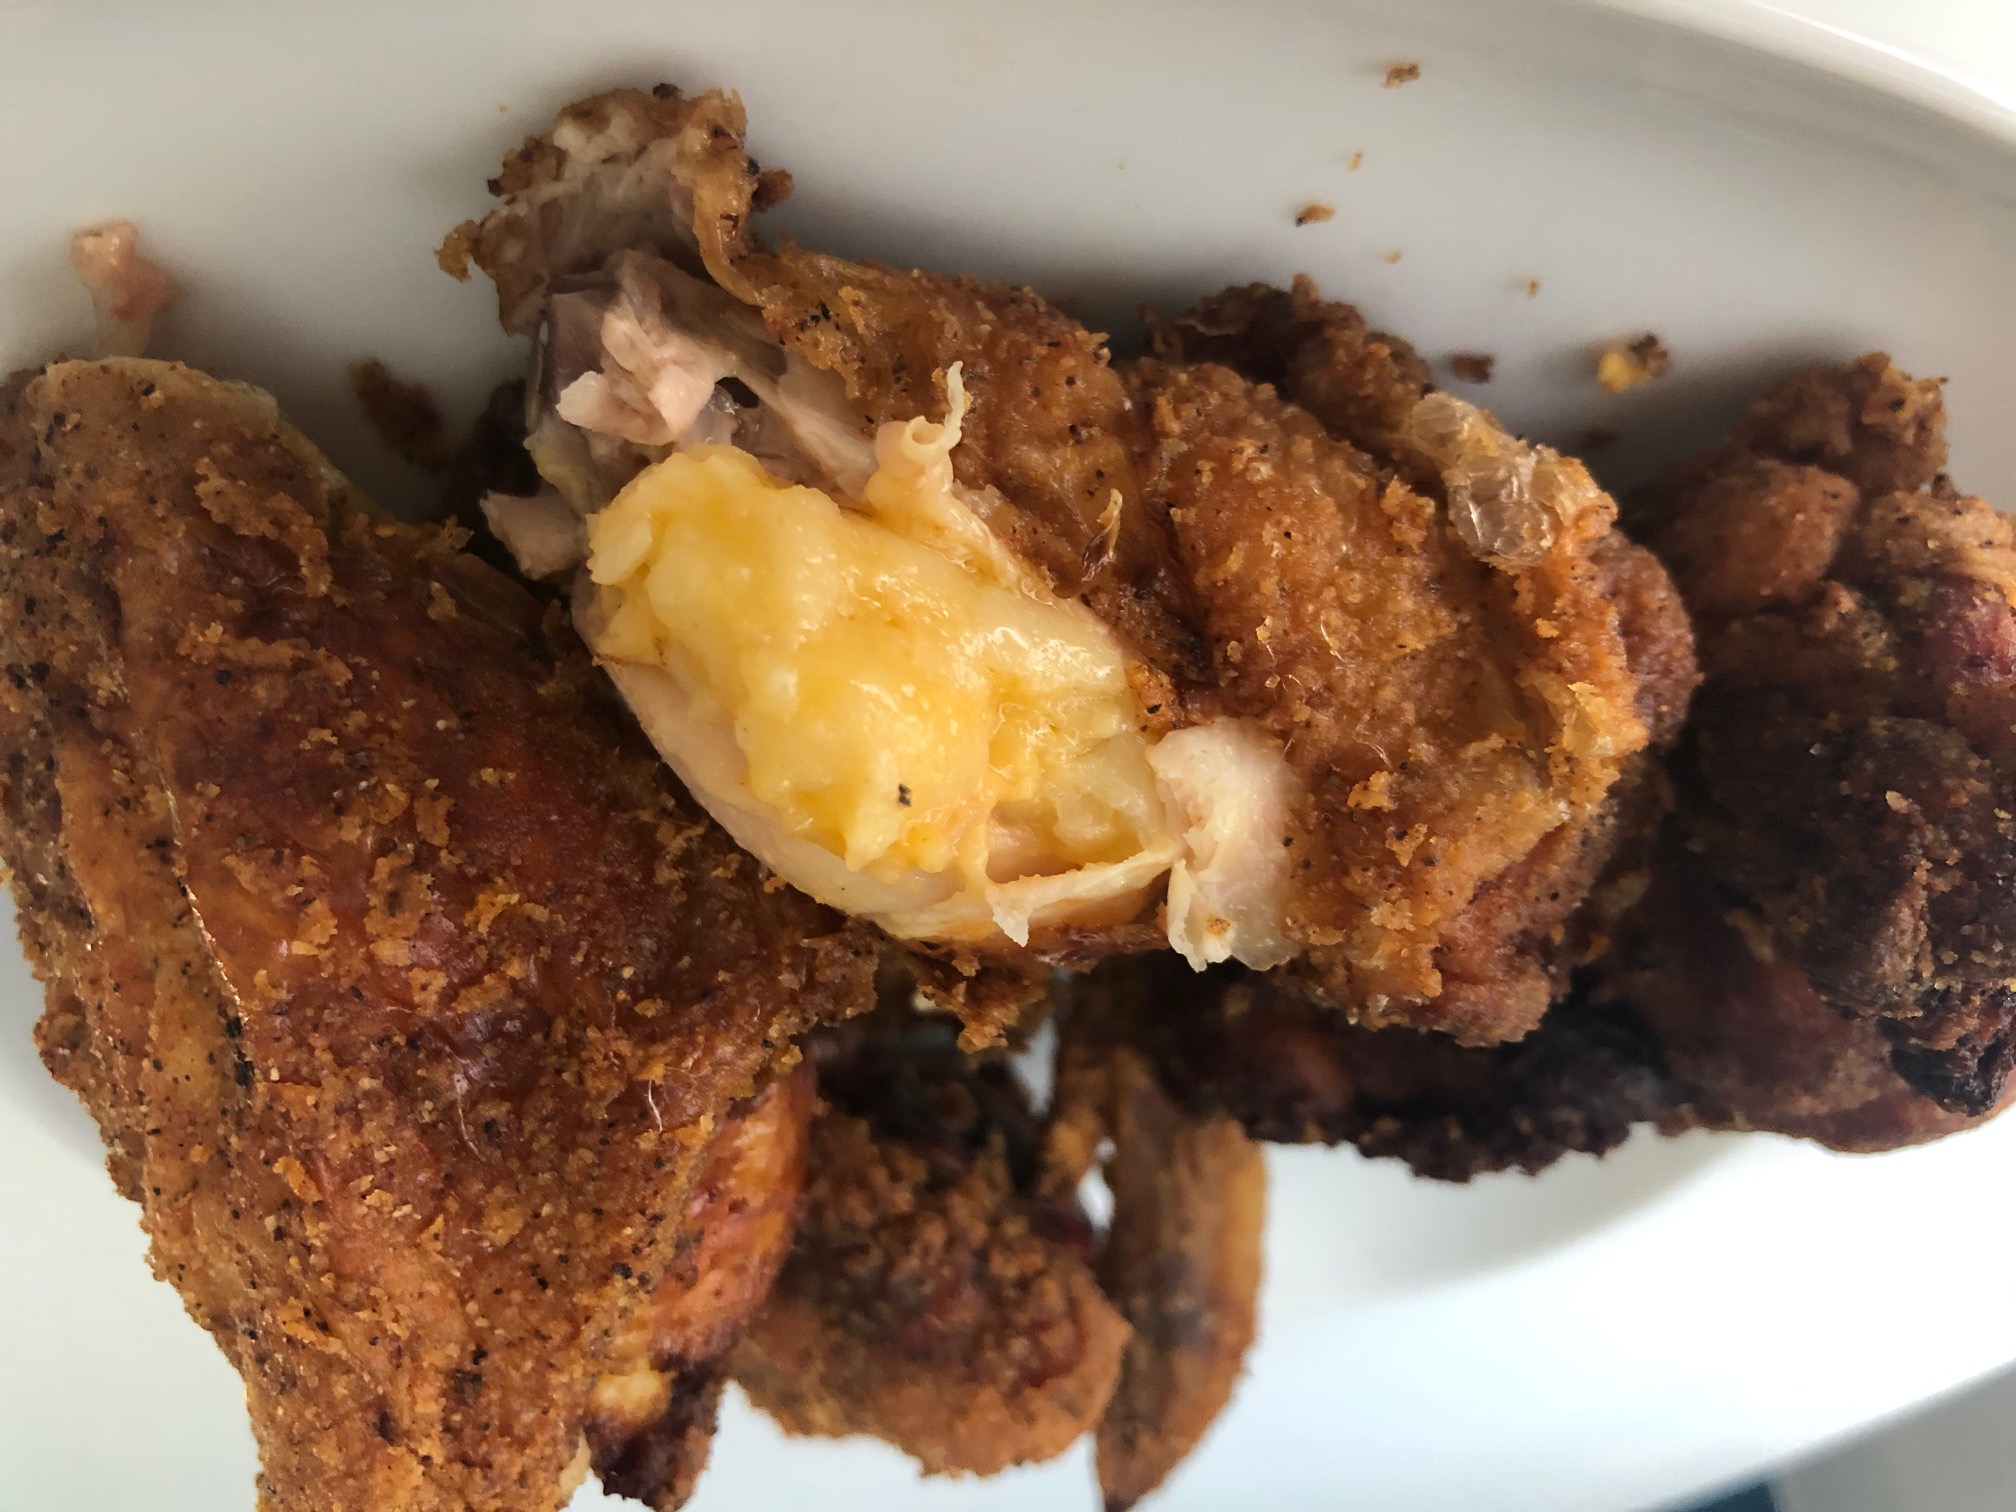 The Stuft Bird's macaroni wing is sliced to reveal the cheesy macaroni inside the fried chicken skin. Photo by Alyssa Buckley.